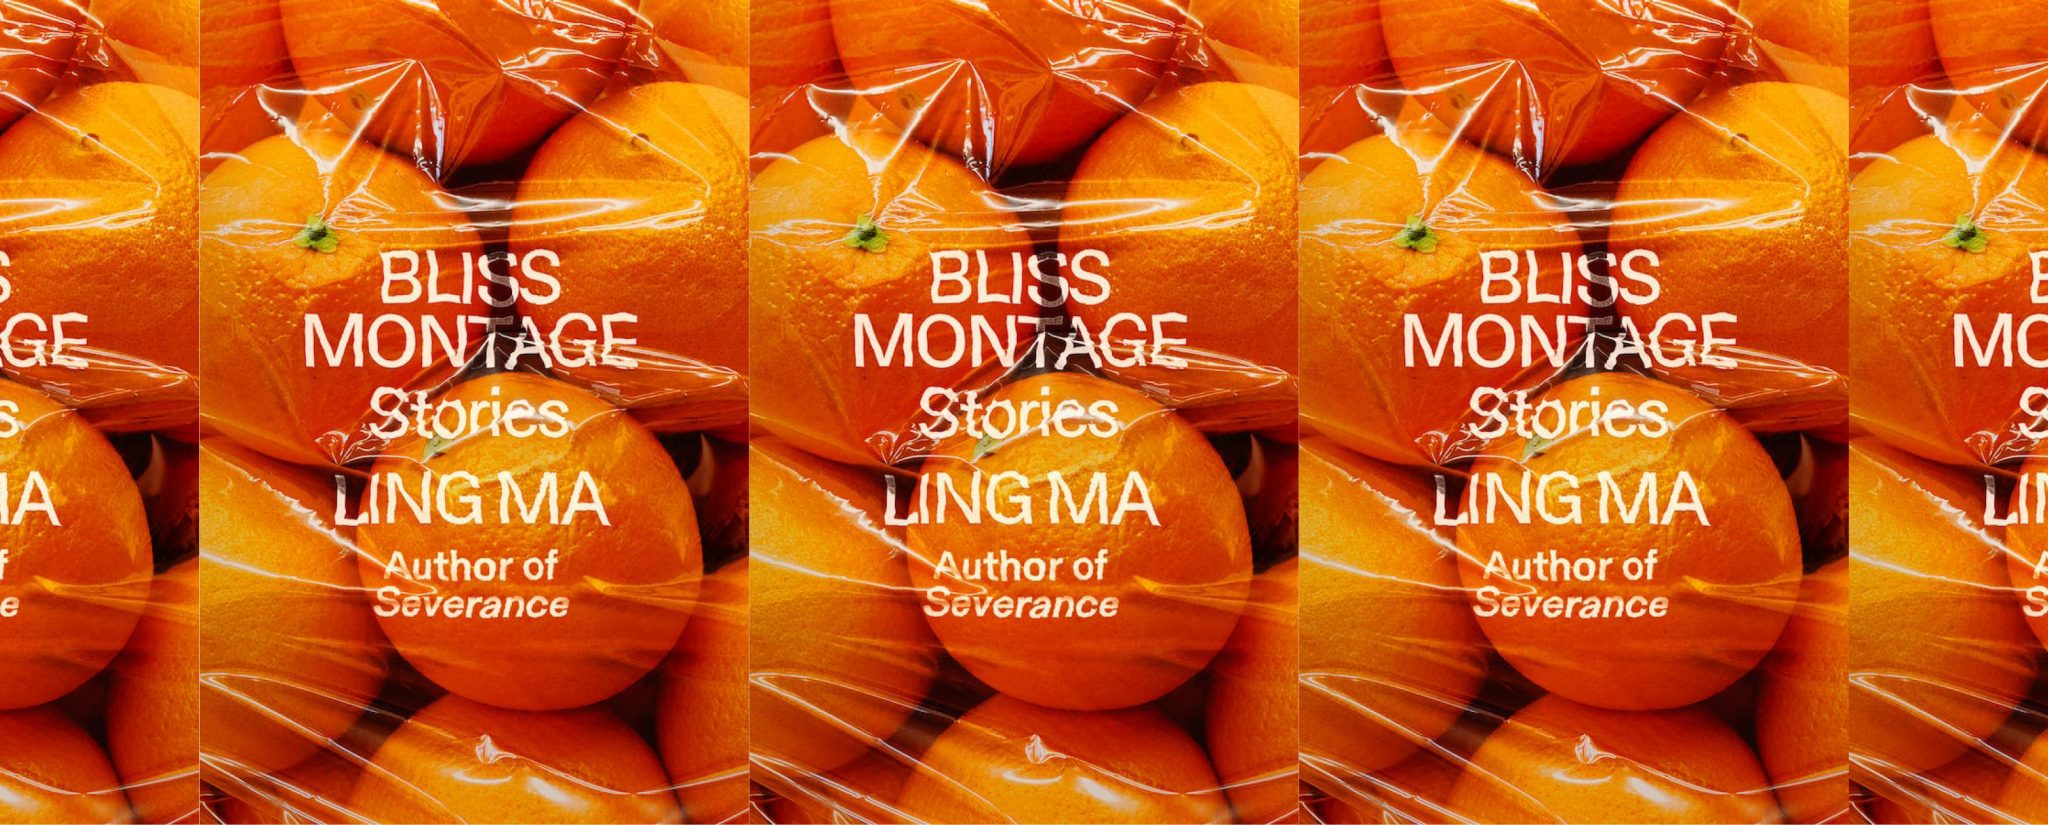 Bliss Montage by Ling Ma